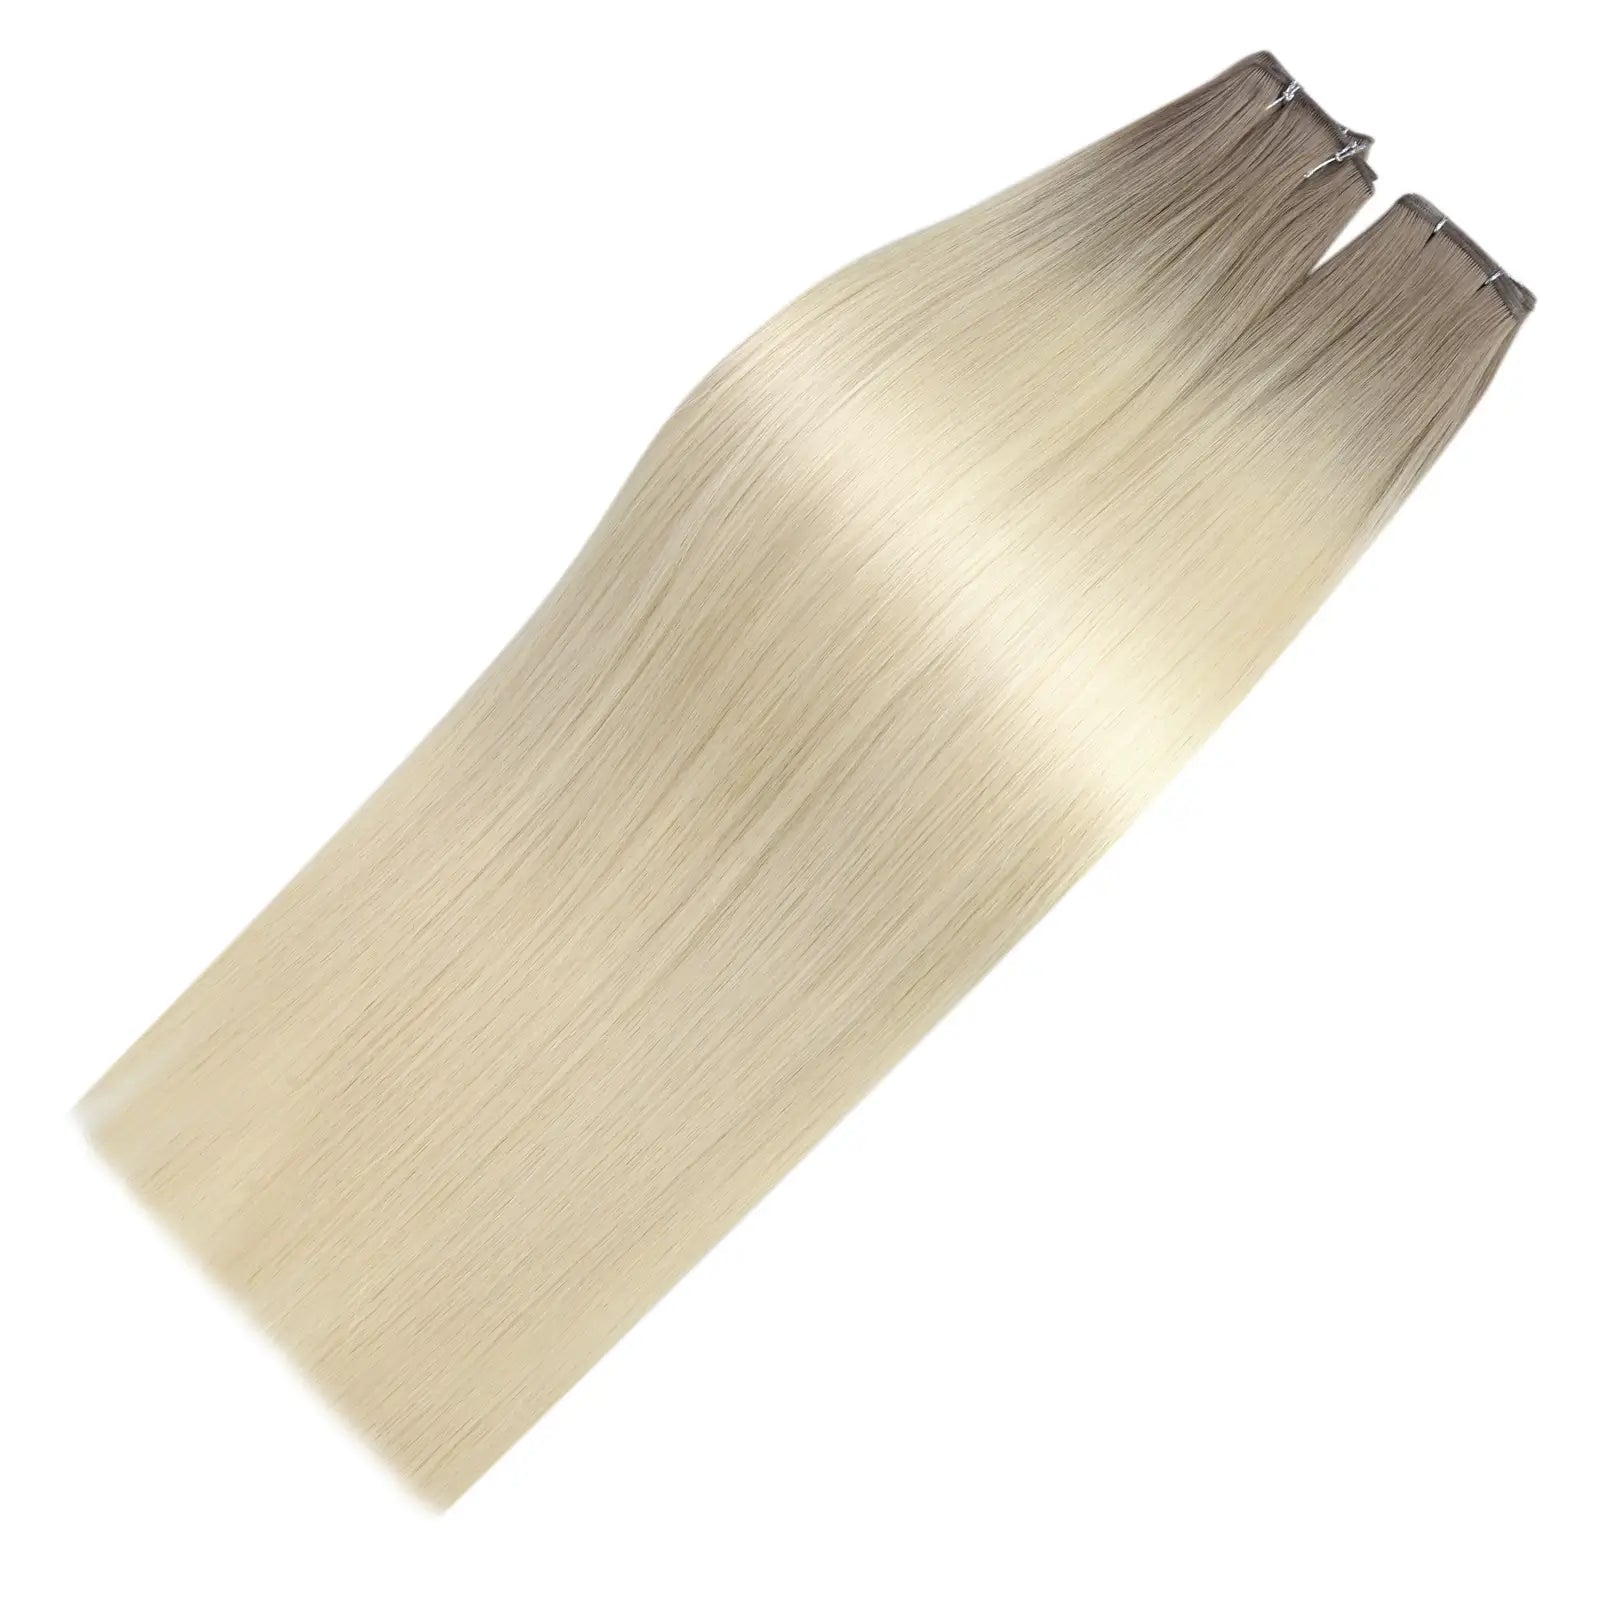 Genius Weft Extensions Human Hair Ombre Color